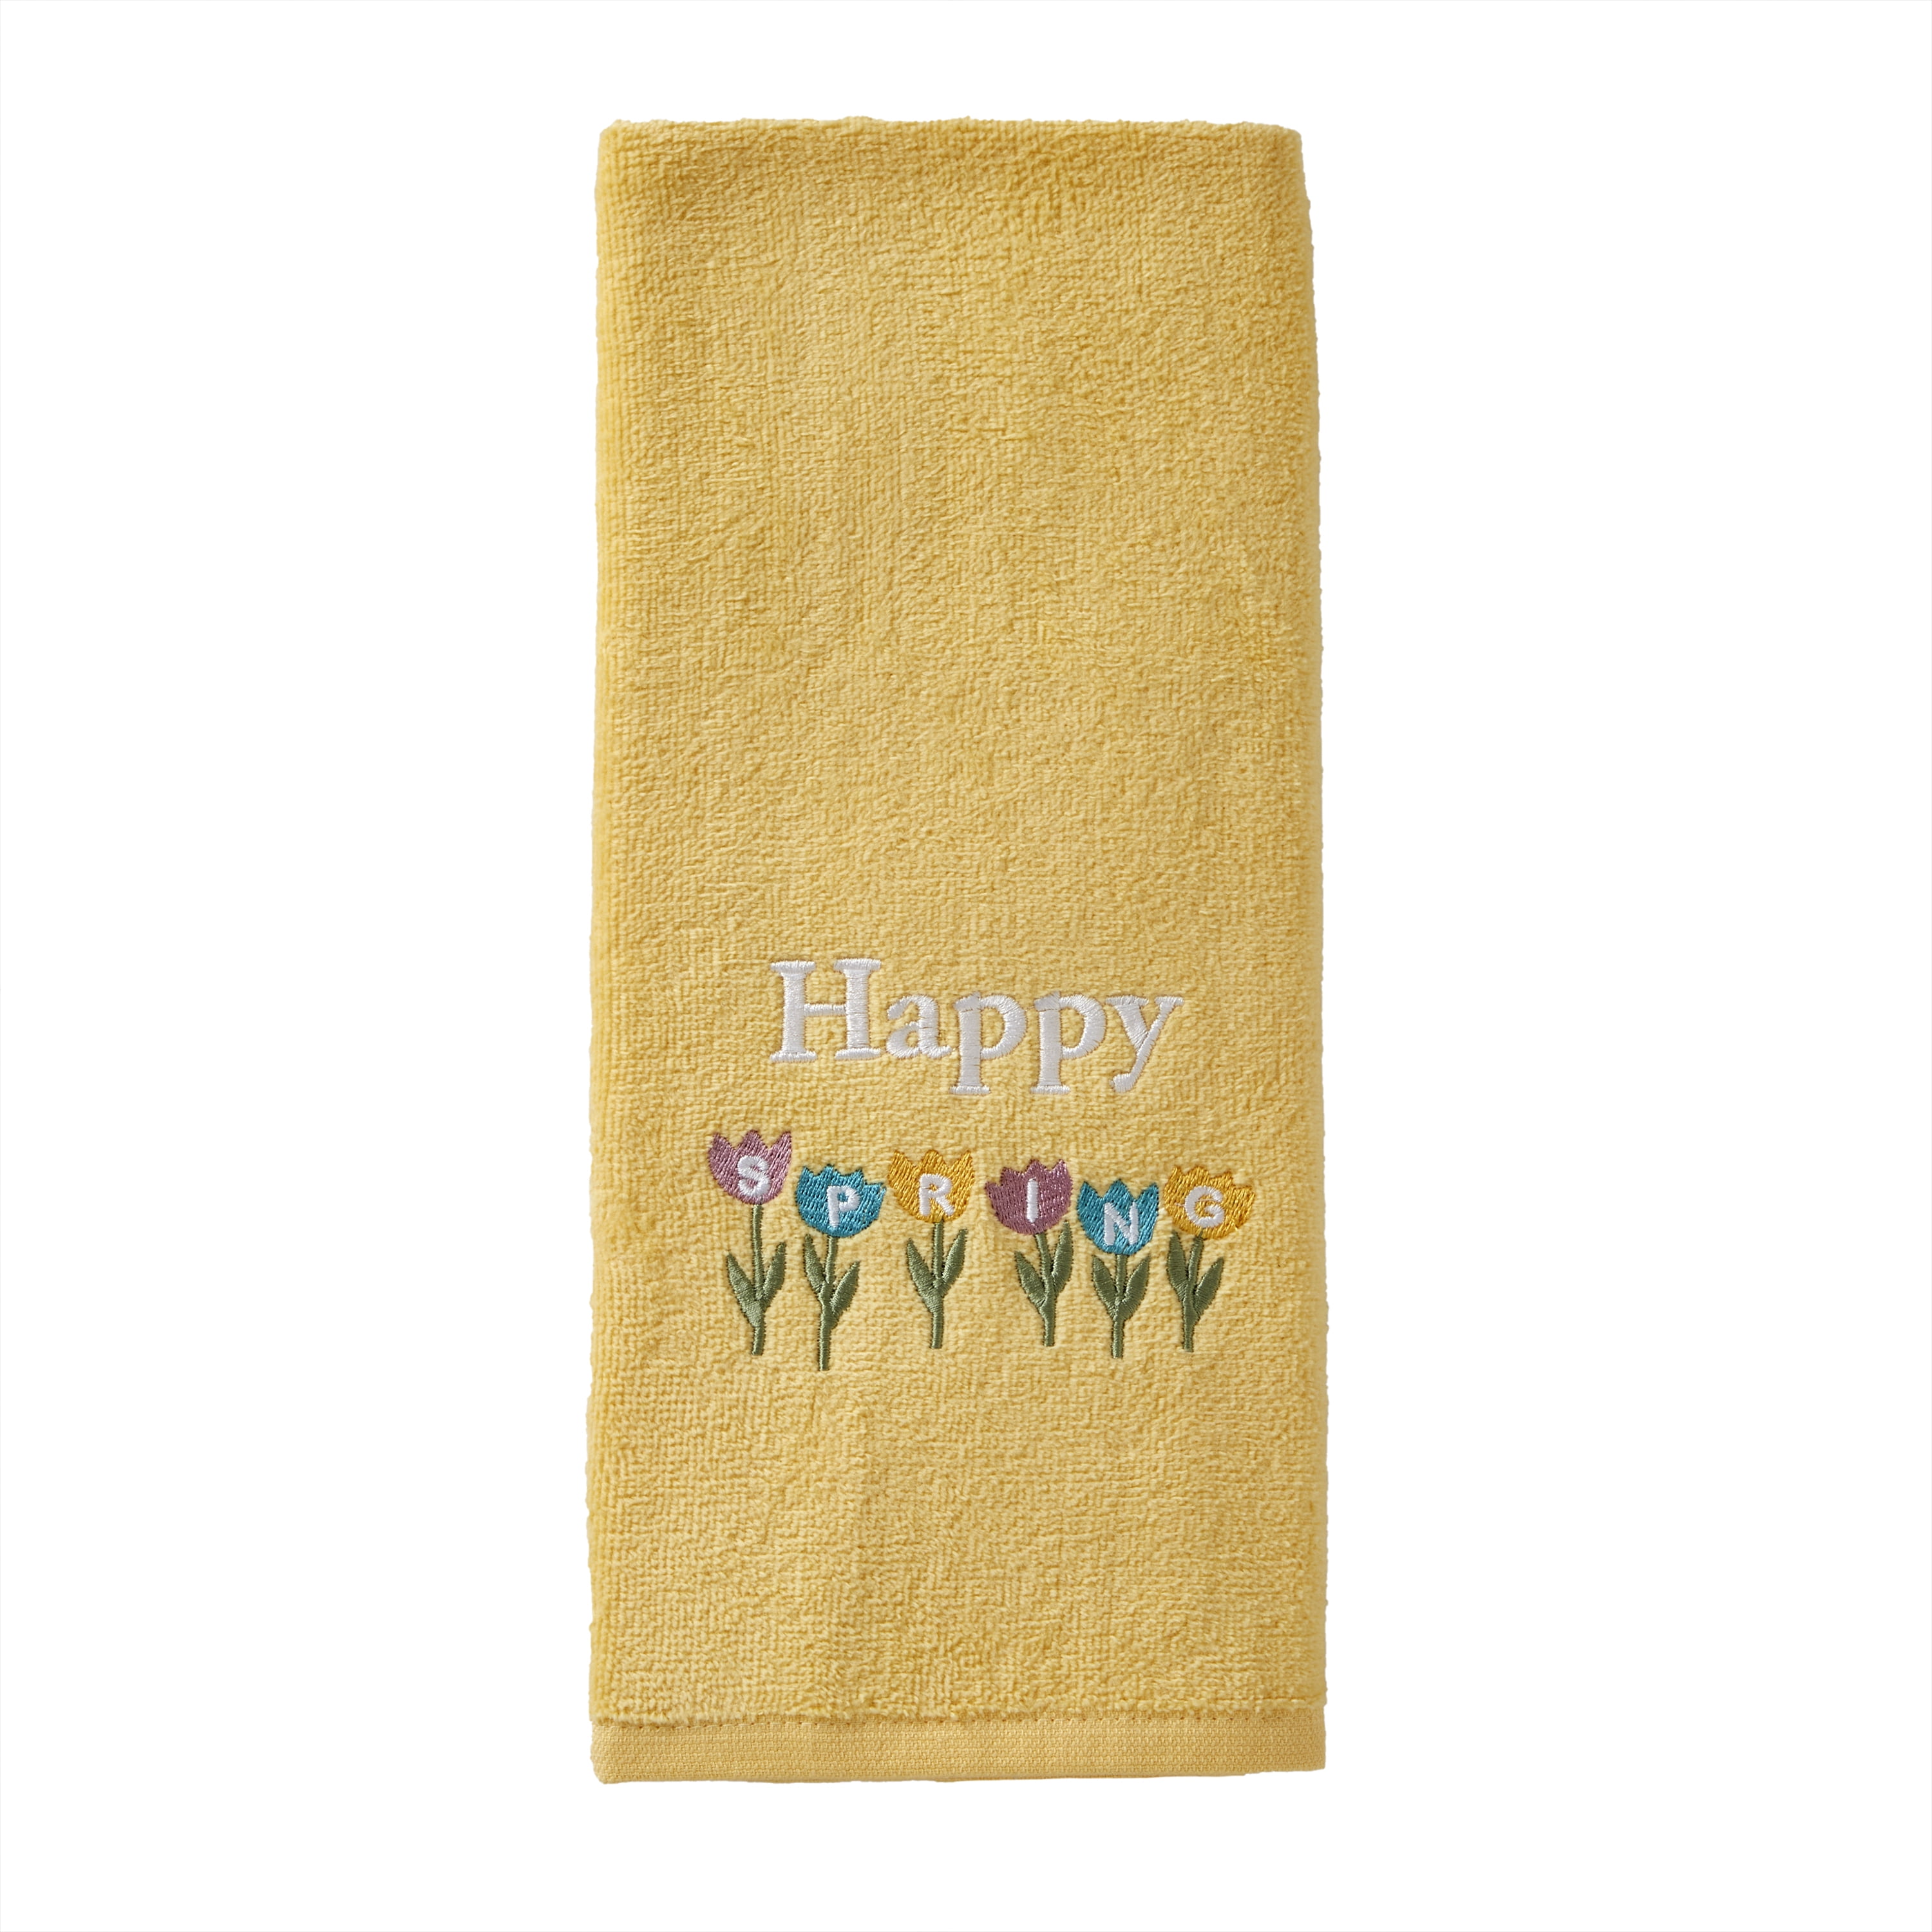 Mill & Thread 4pc Embroidered Hand Towel Set